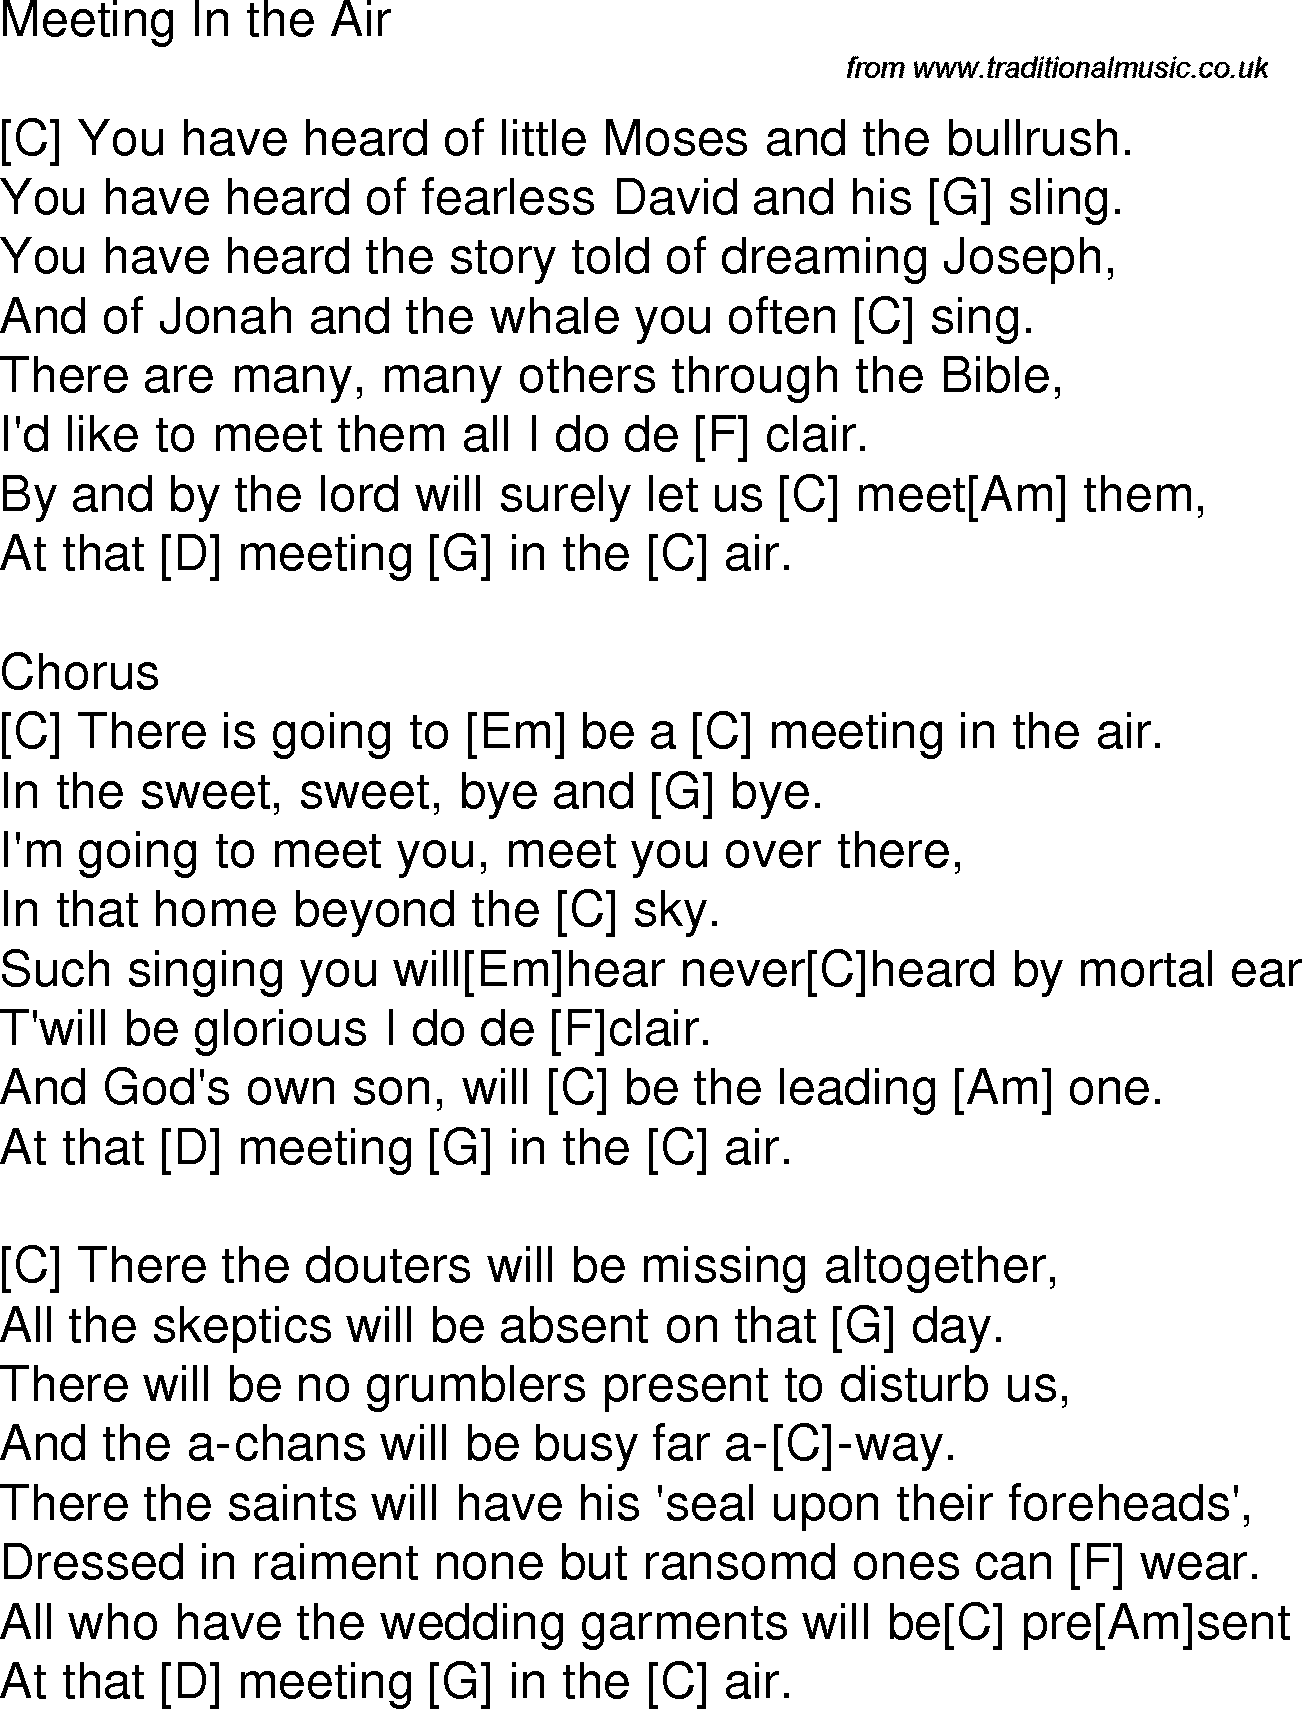 Old time song lyrics with chords for Meeting In The Air C